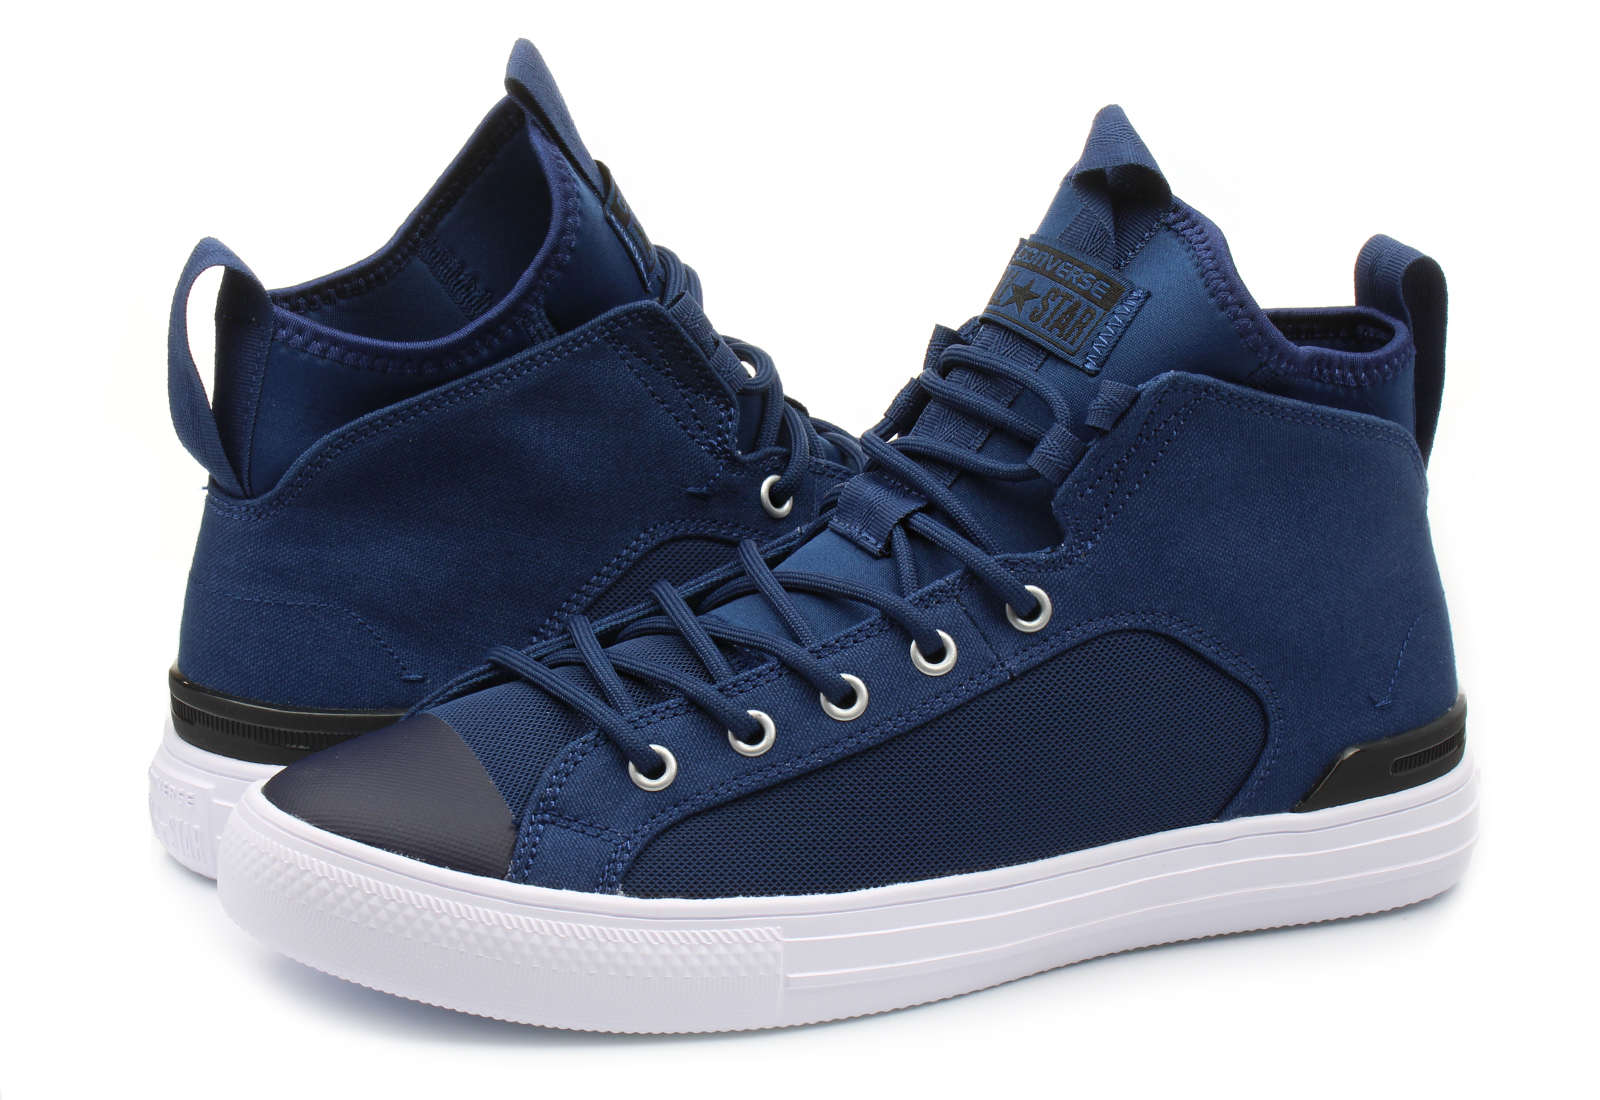 Converse Shoes - Ct As Ultra Mid - 159631C - Online shop for sneakers,  shoes and boots